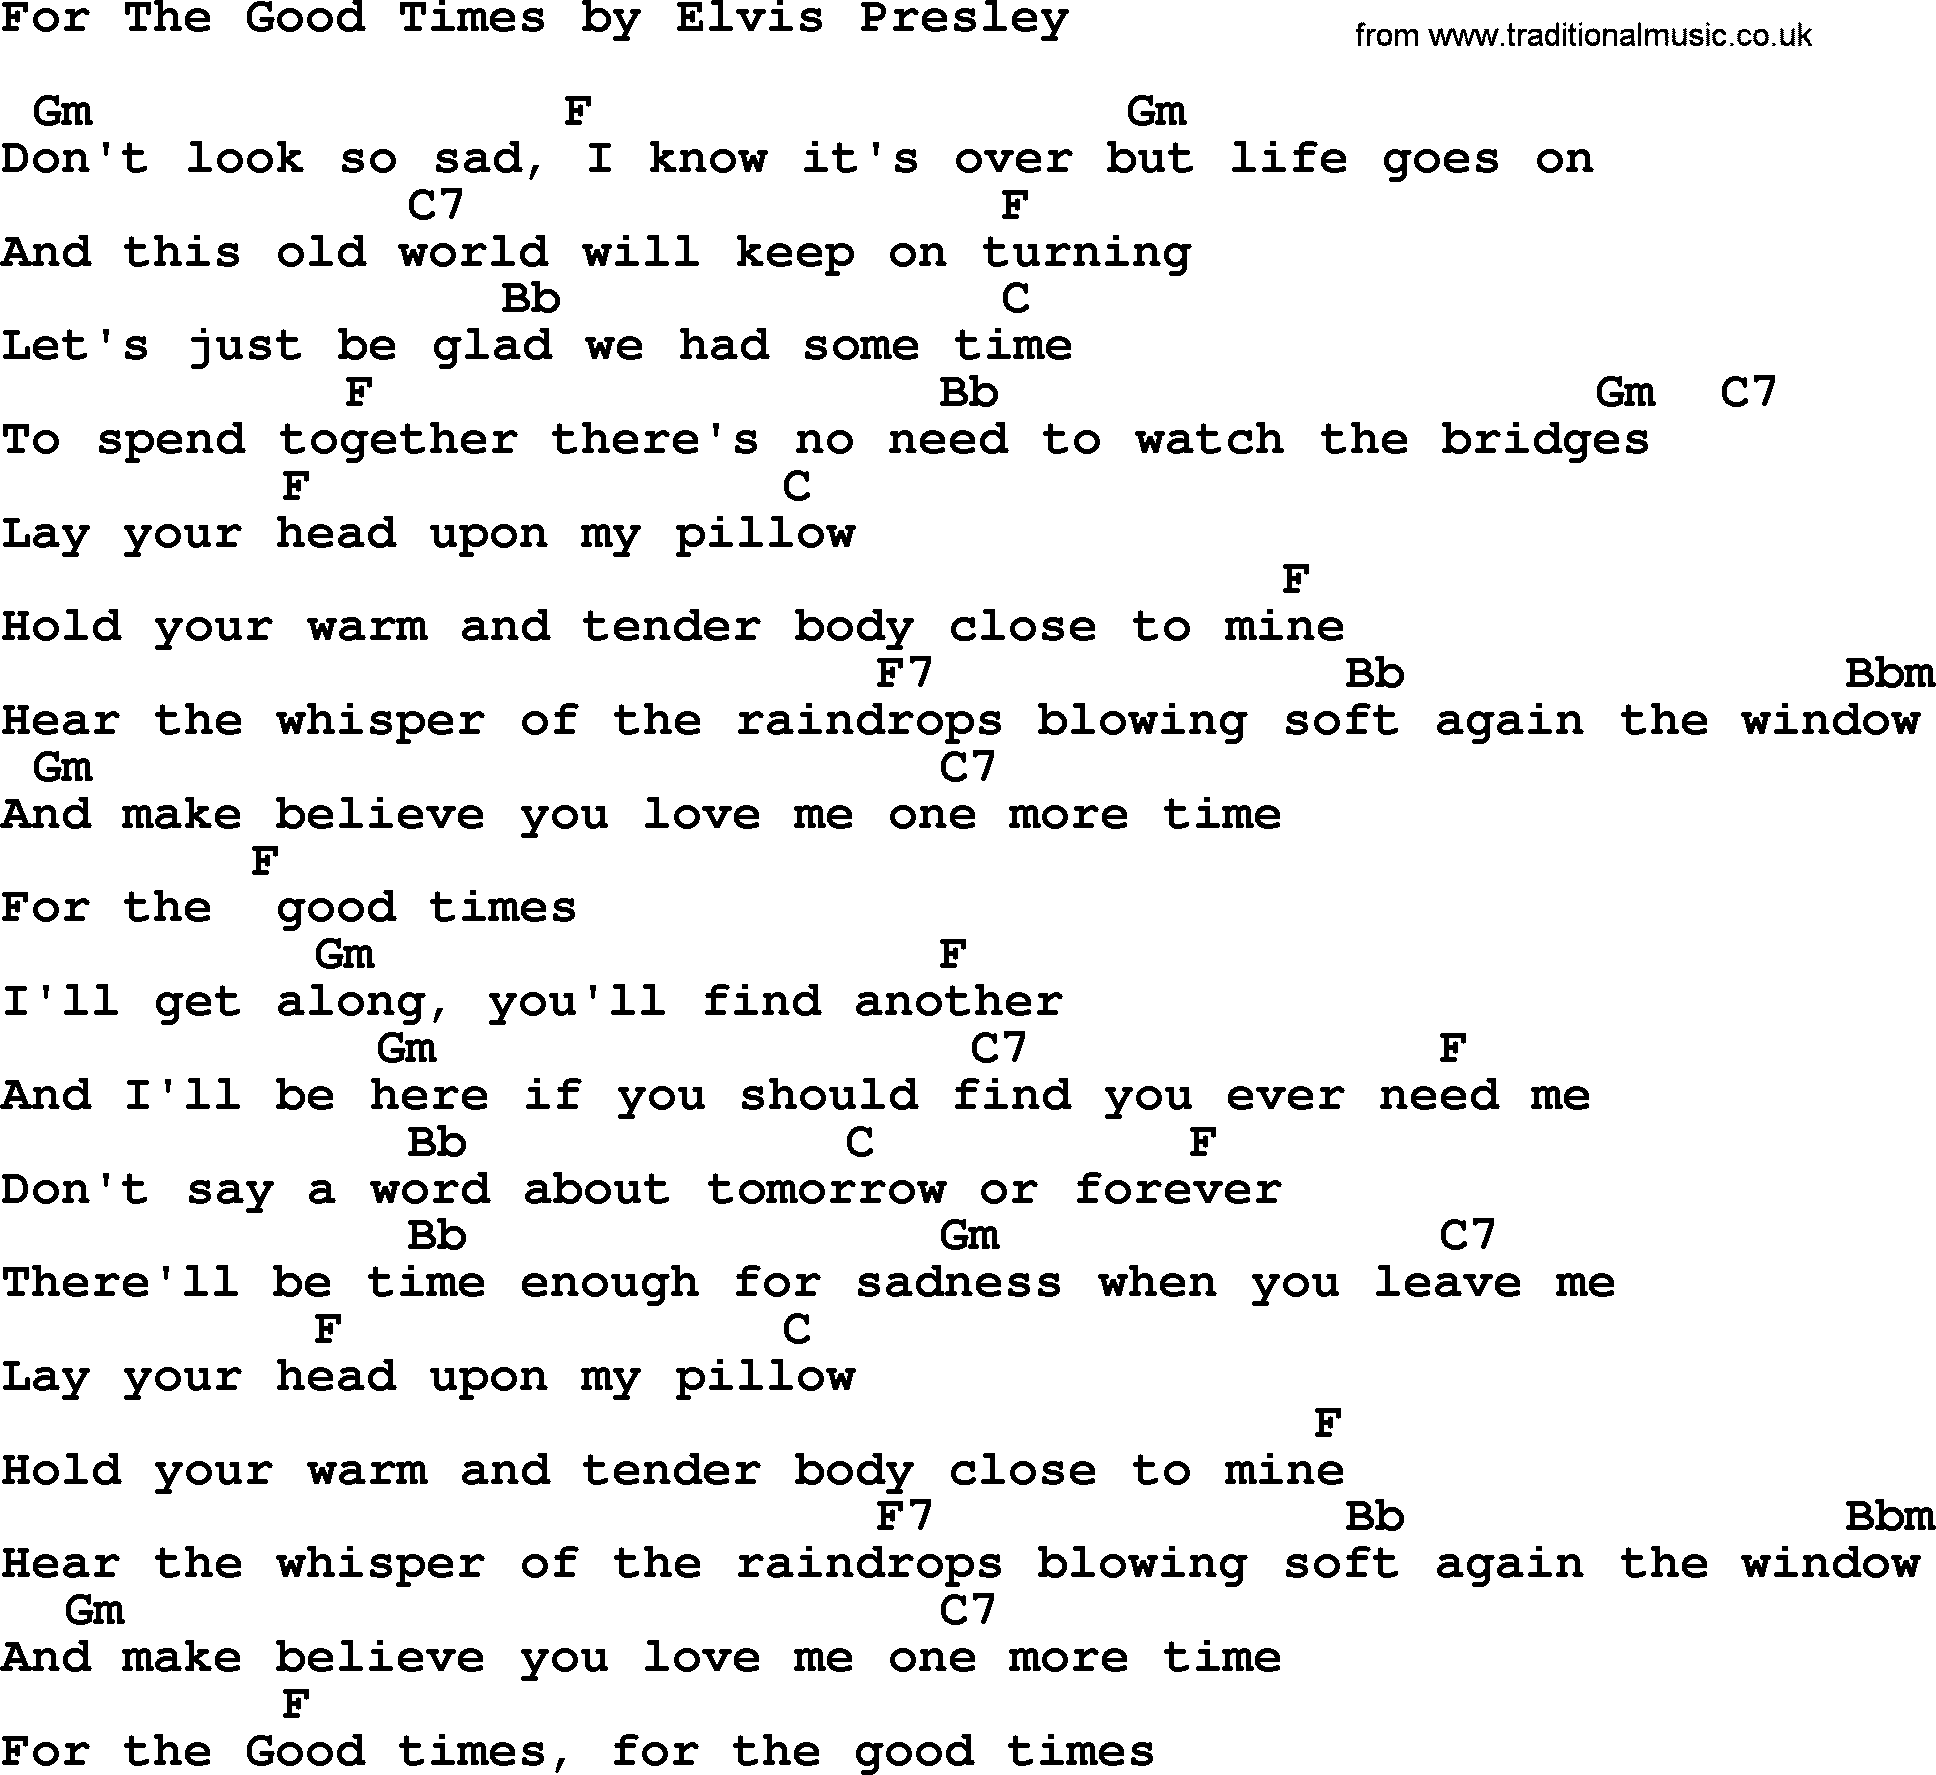 Elvis Presley song: For The Good Times, lyrics and chords